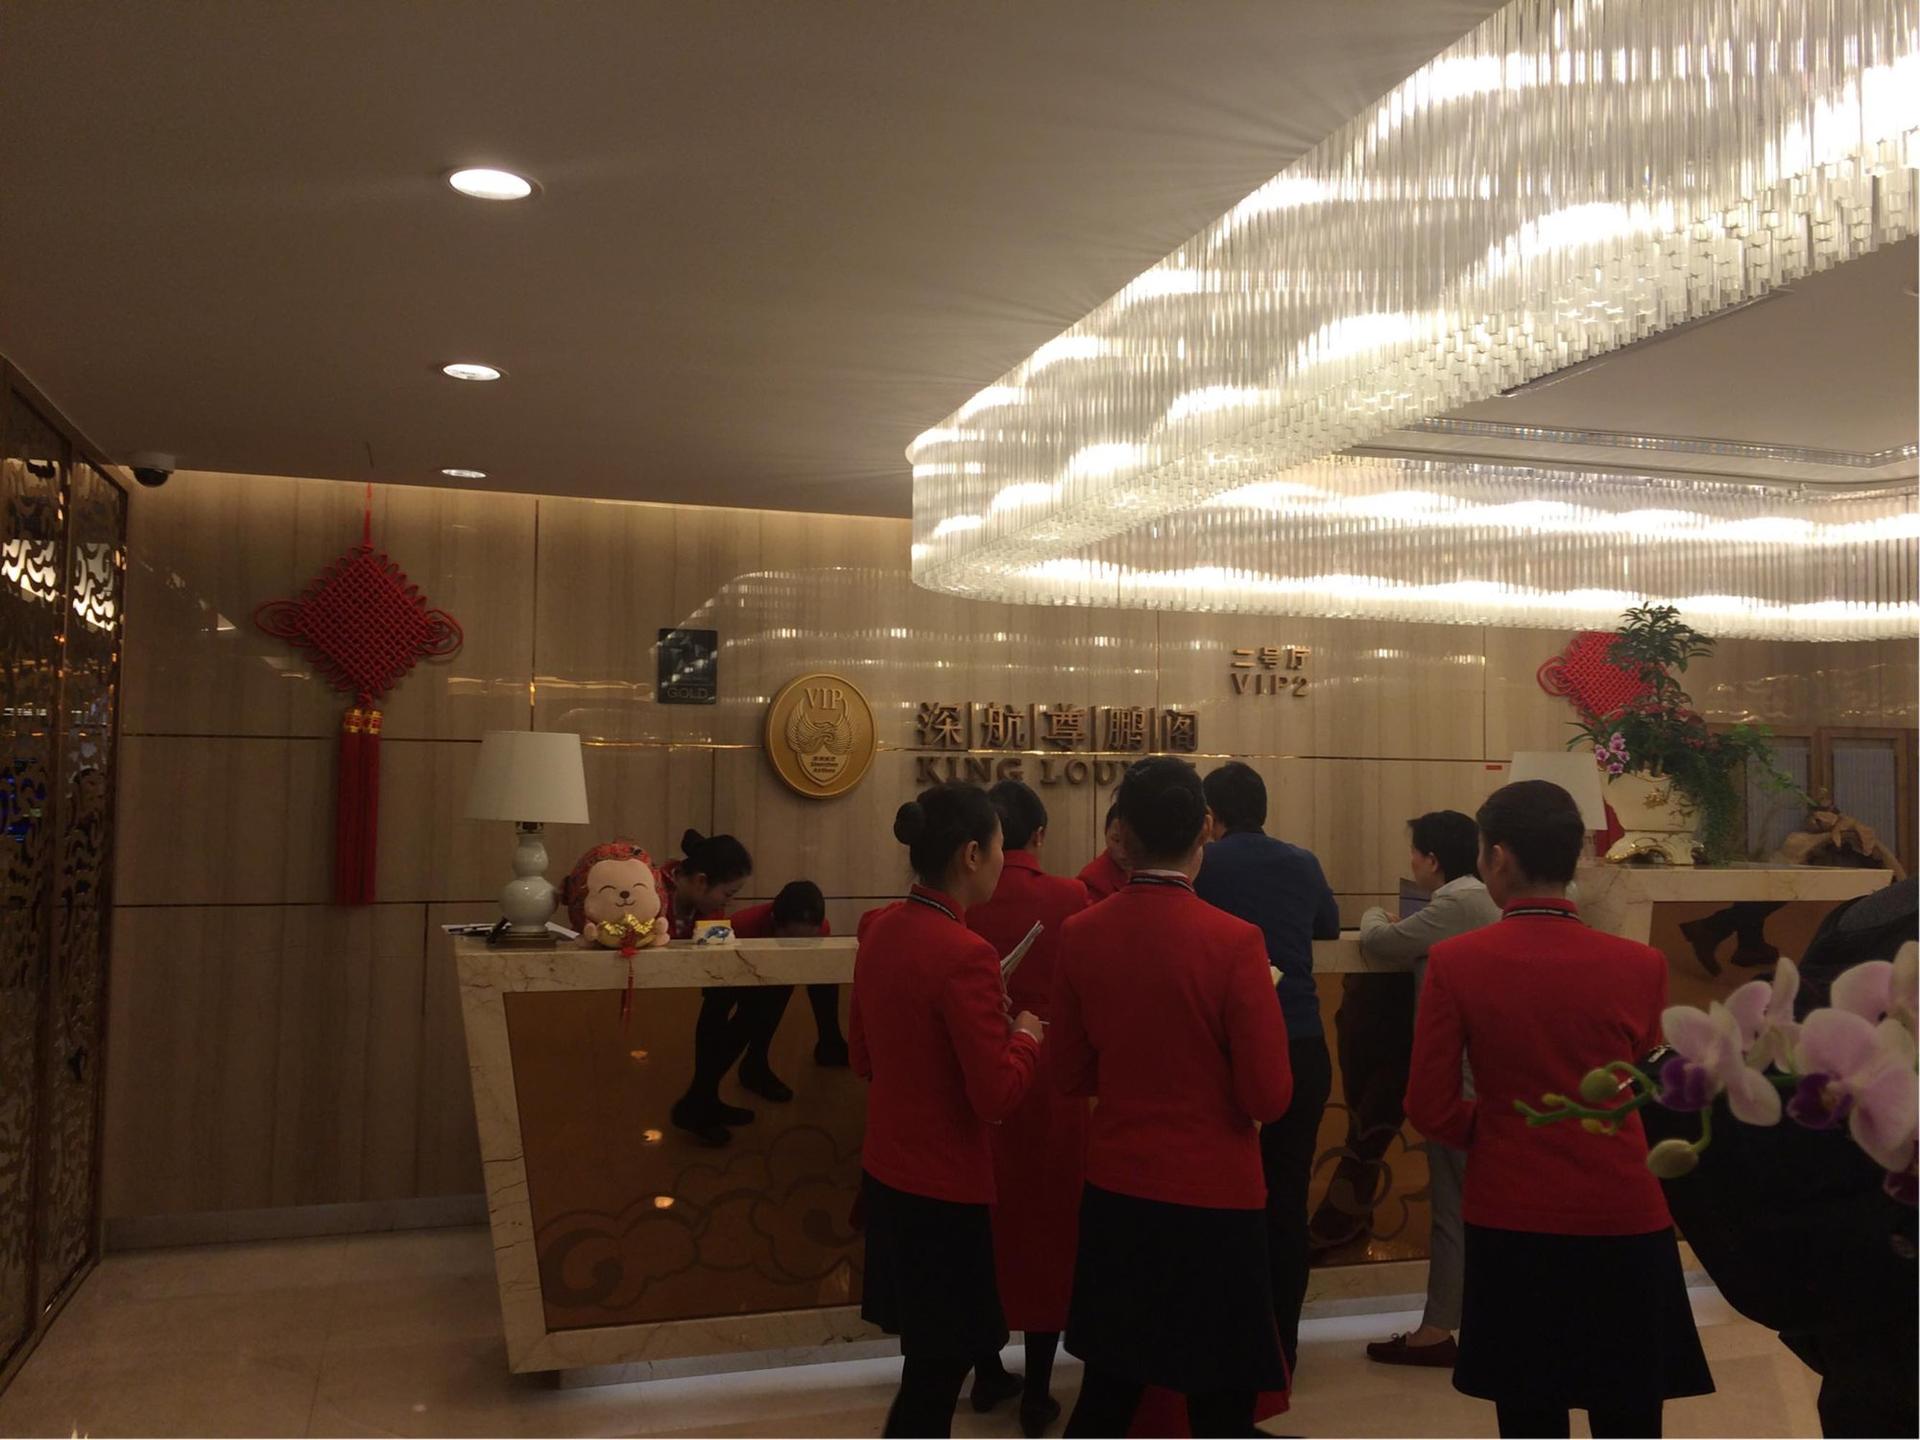 Shenzhen Airlines King Lounge Hall 2 image 1 of 7